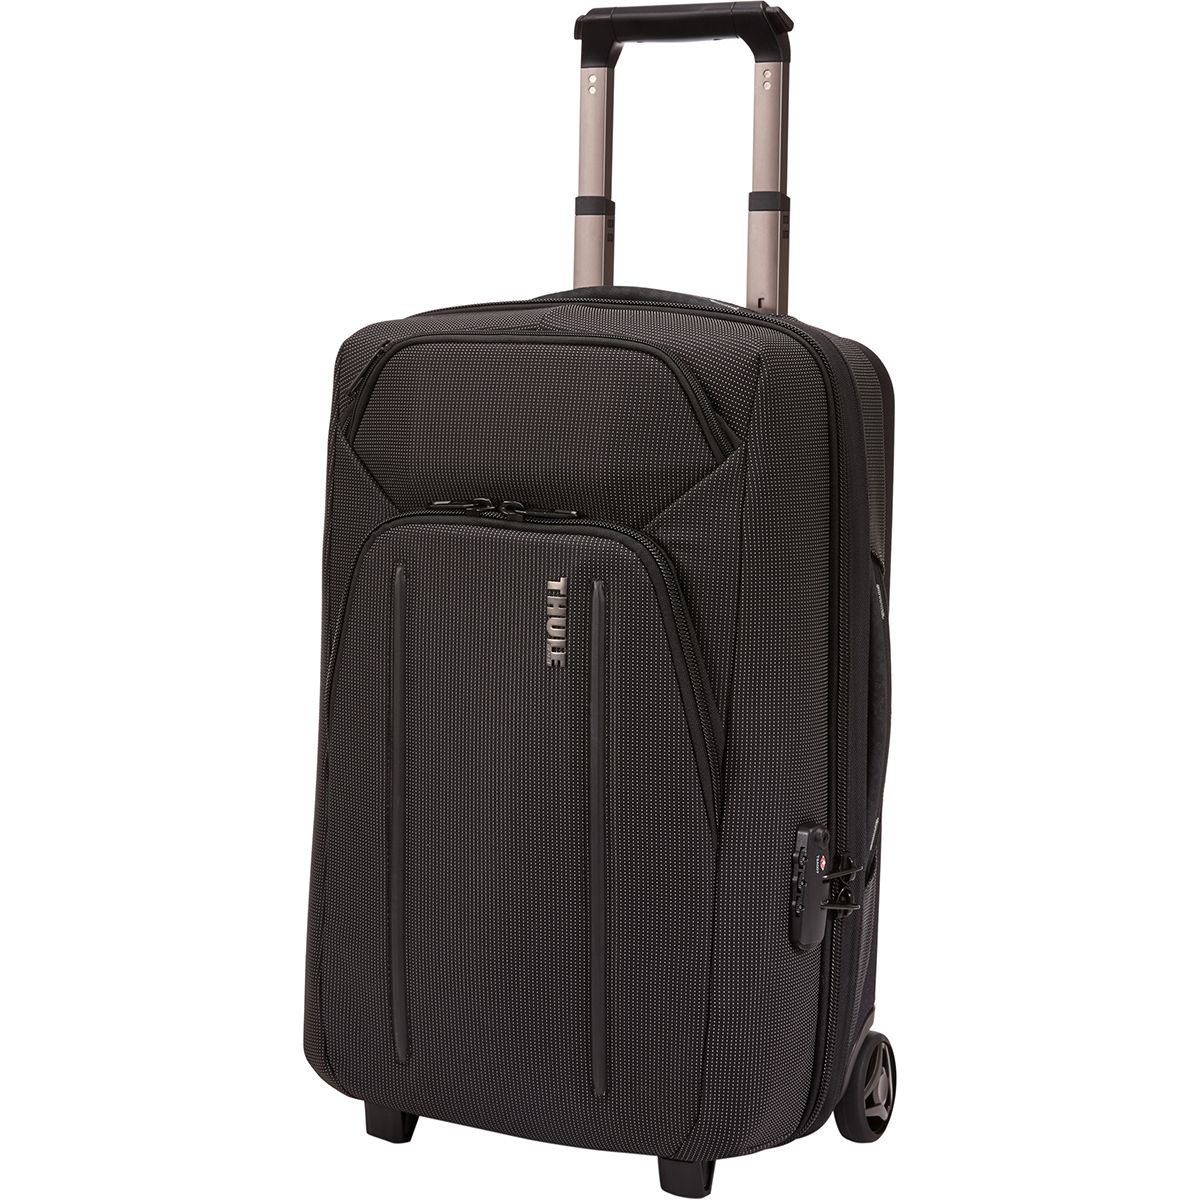 Thule Crossover 2 38L Carry-On Bag